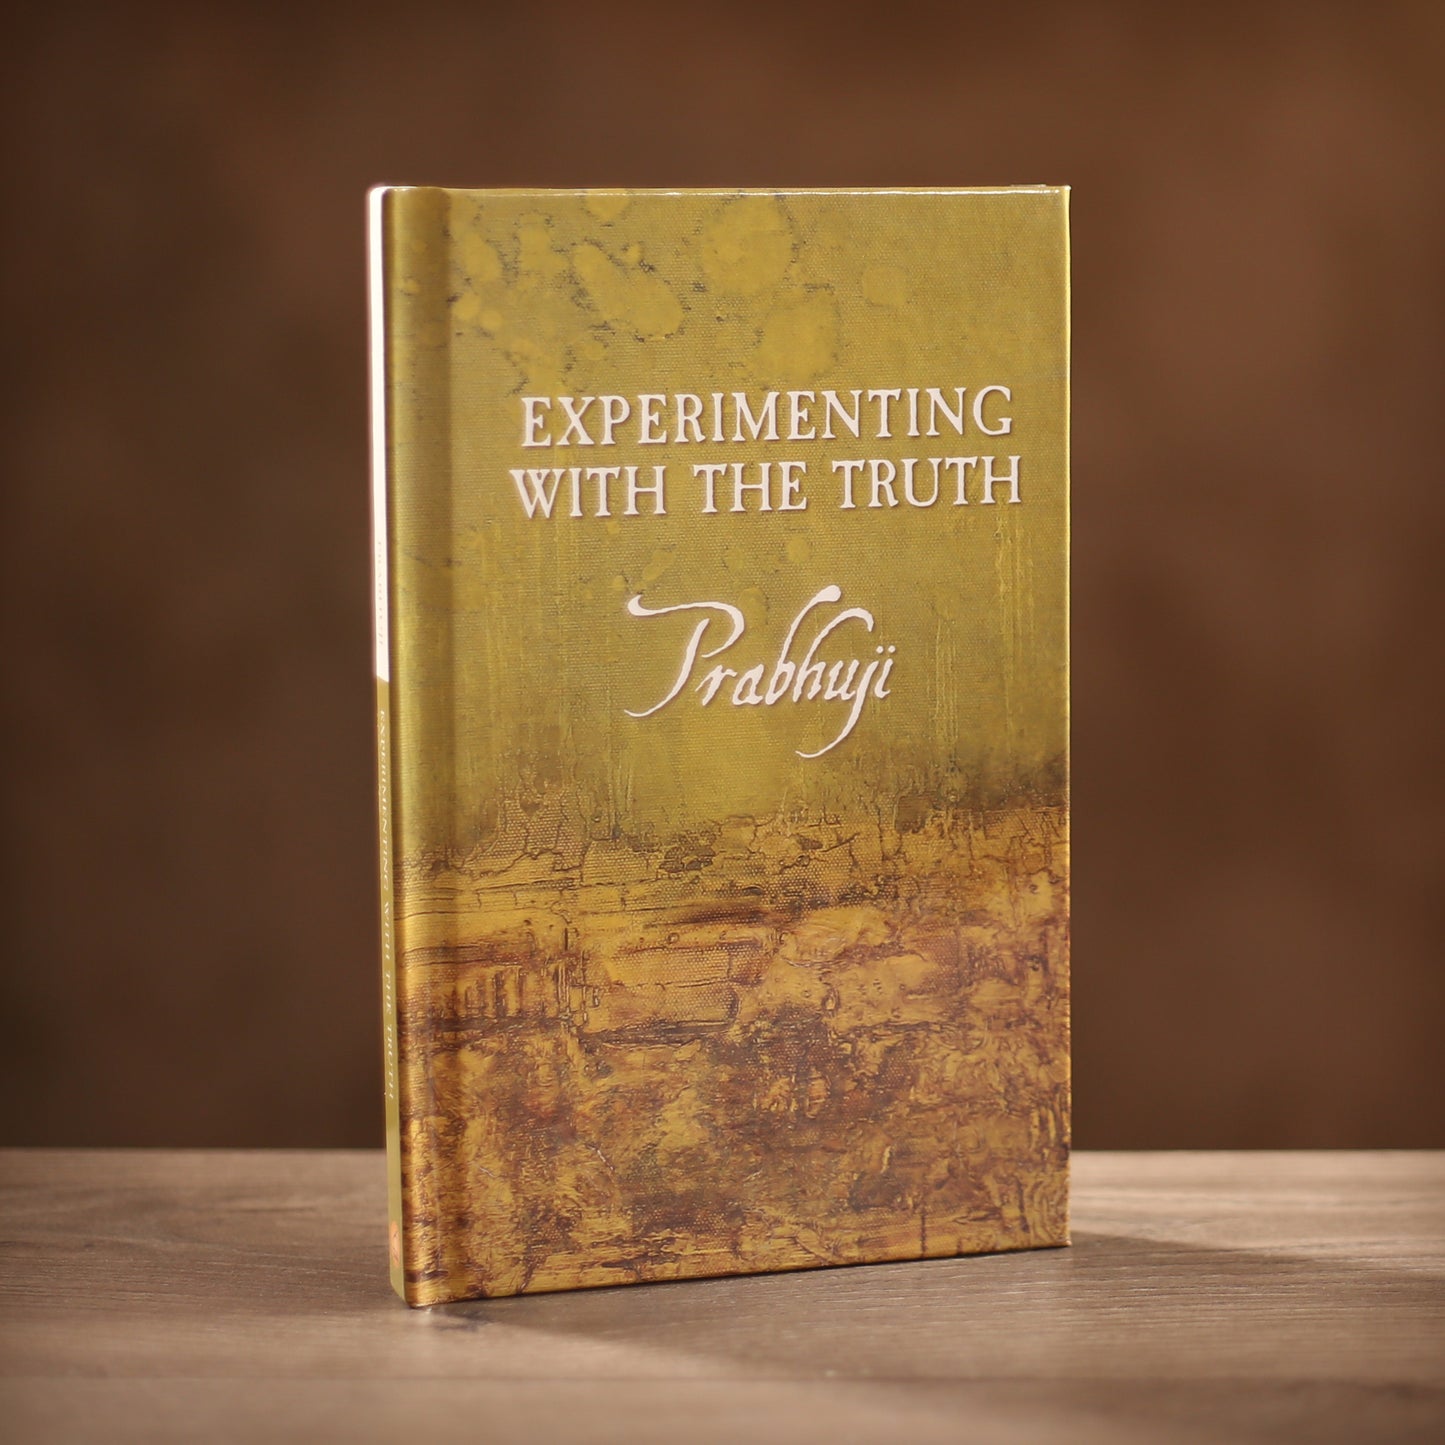 Book Experimenting with the Truth by Prabhuji (Hard cover - English)